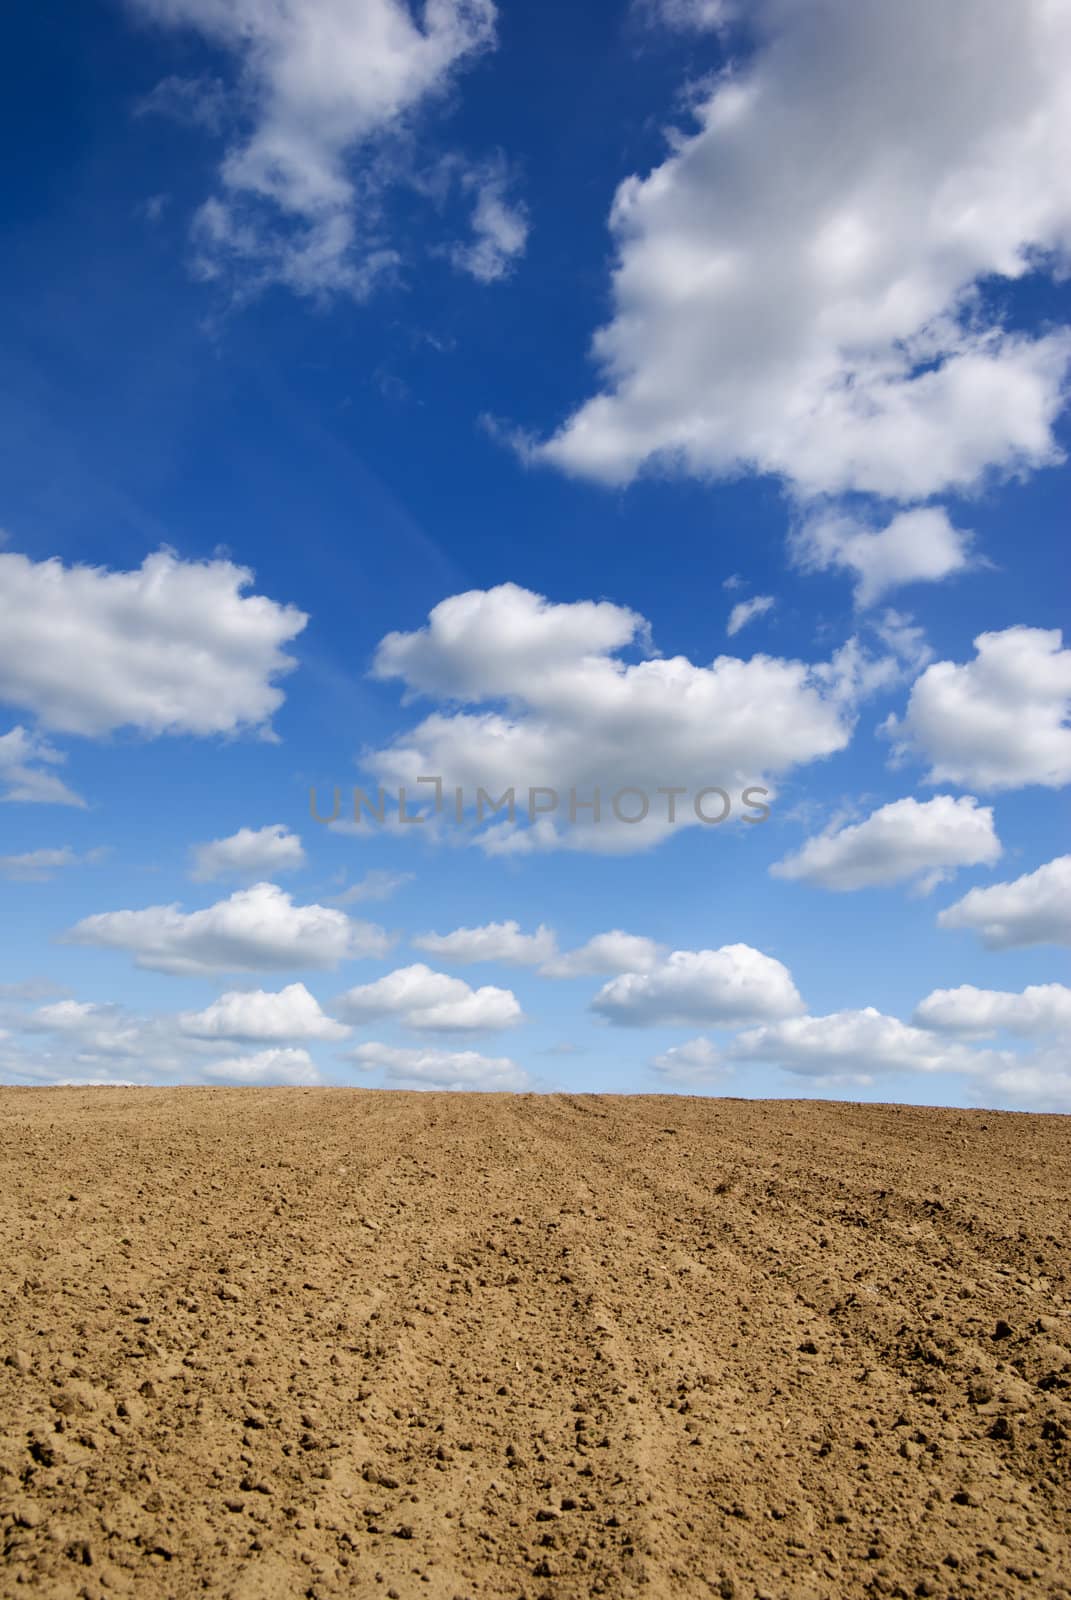 Blue sky with clouds over ploughed field.